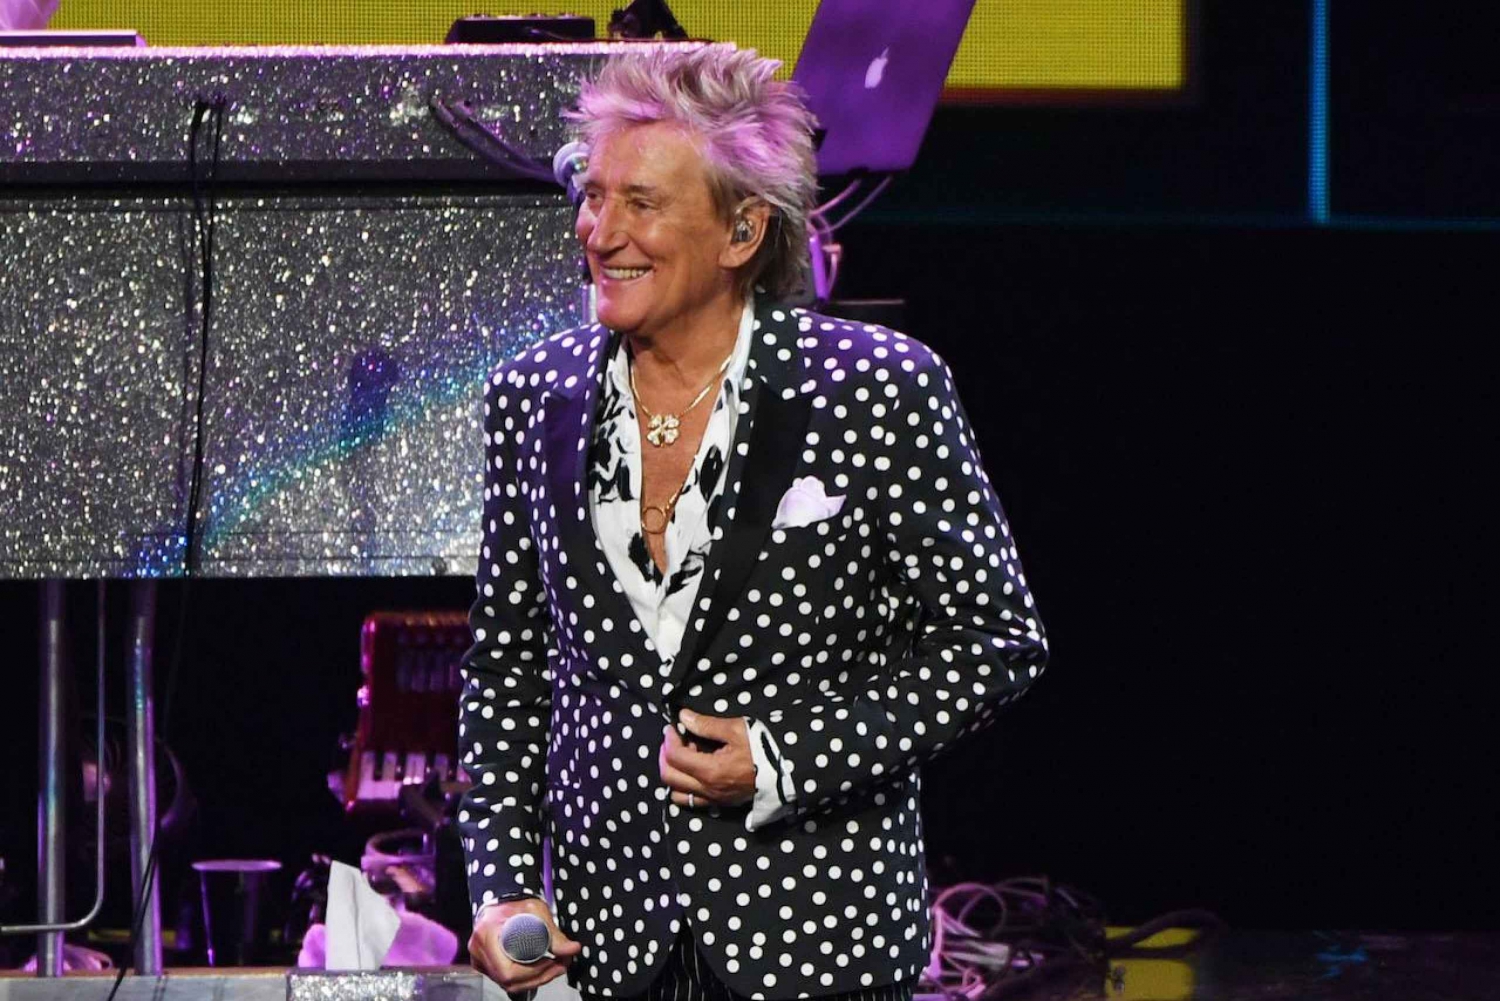 Las Vegas: Rod Stewart - The Hits at the Colosseum Theater